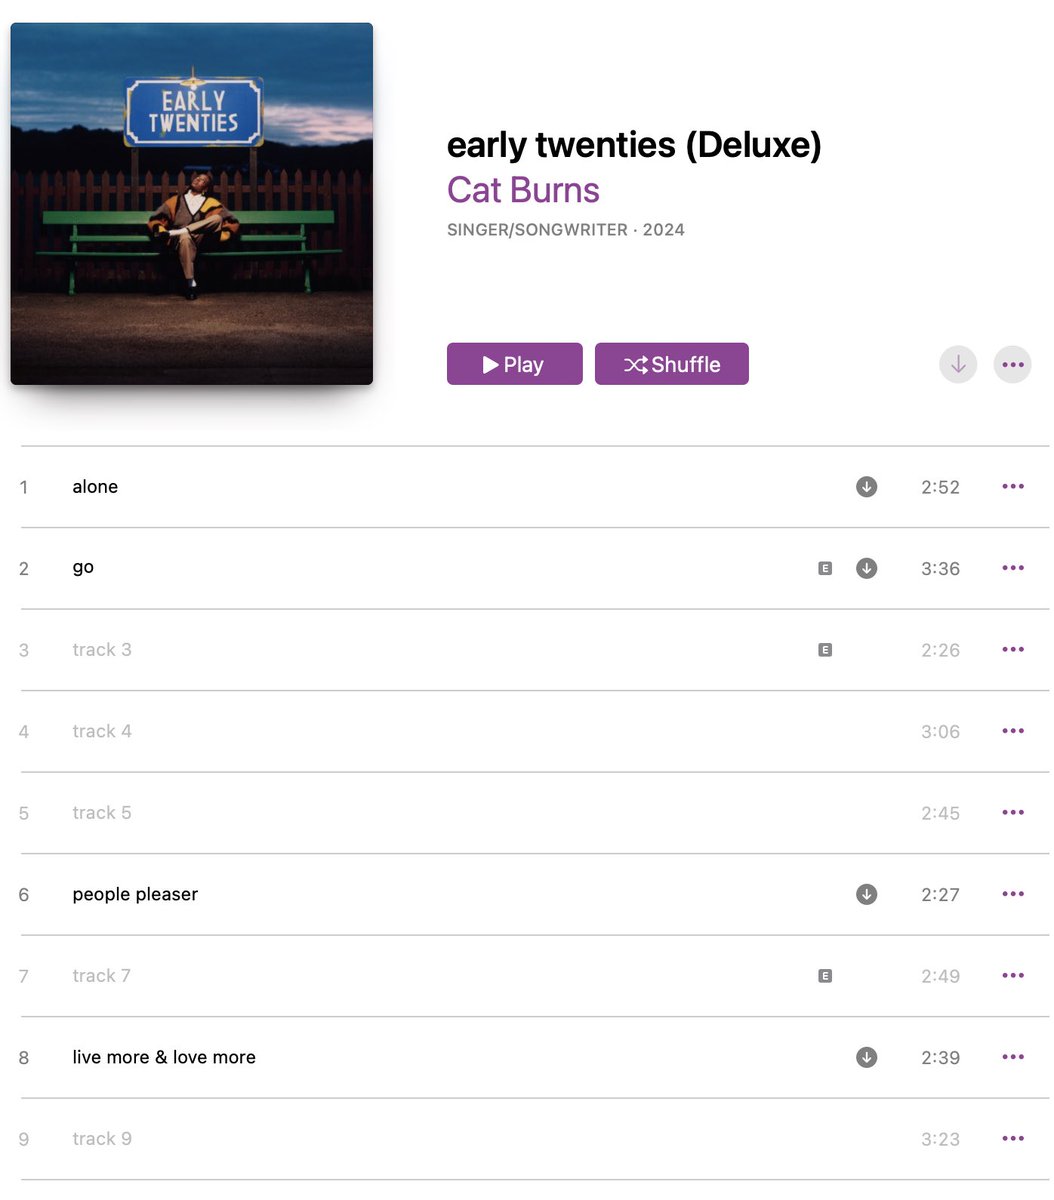 'end game' will be joining this tracklist soon thanks to you guys 😭  pre-add my debut album 'early twenties' on @applemusic  music.apple.com/gb/album/early…